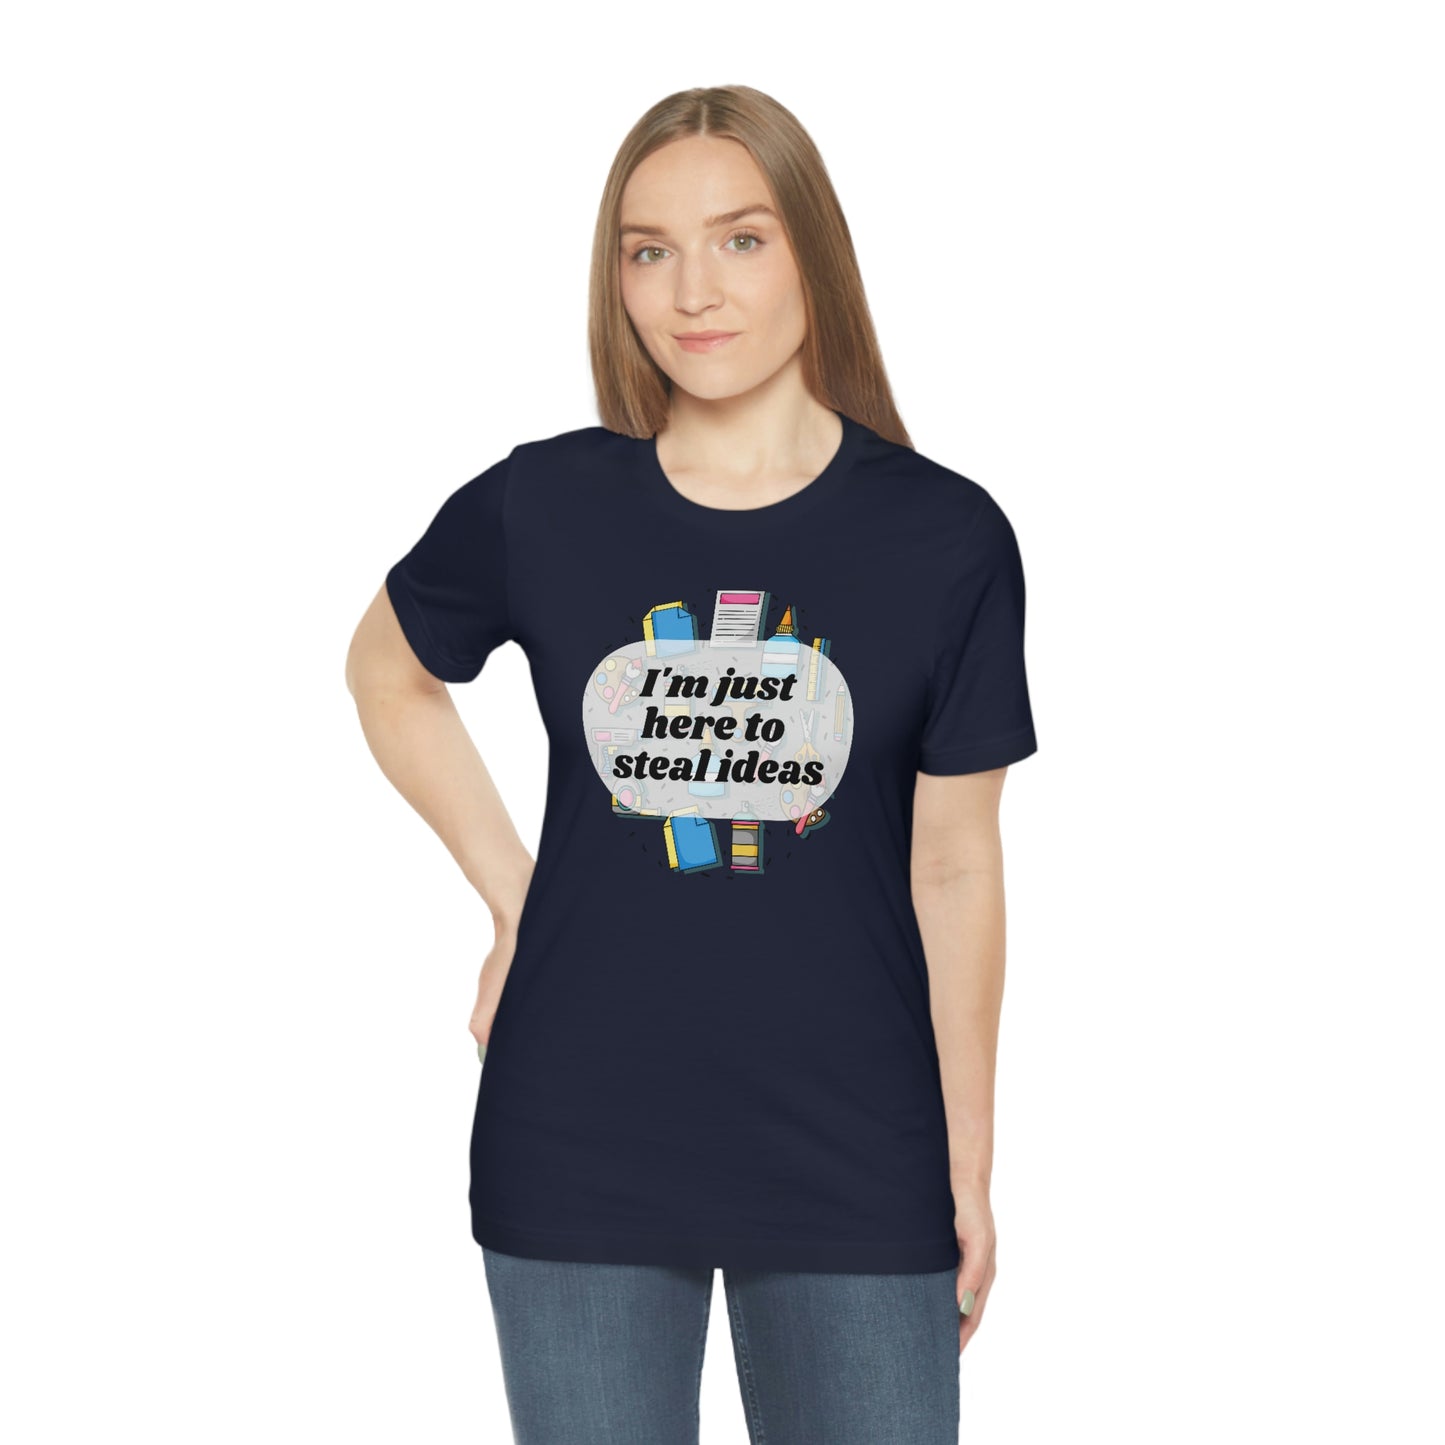 Im just here to steal ideas, funny craft fair shirt, shirt for crafters, multiple colors available!